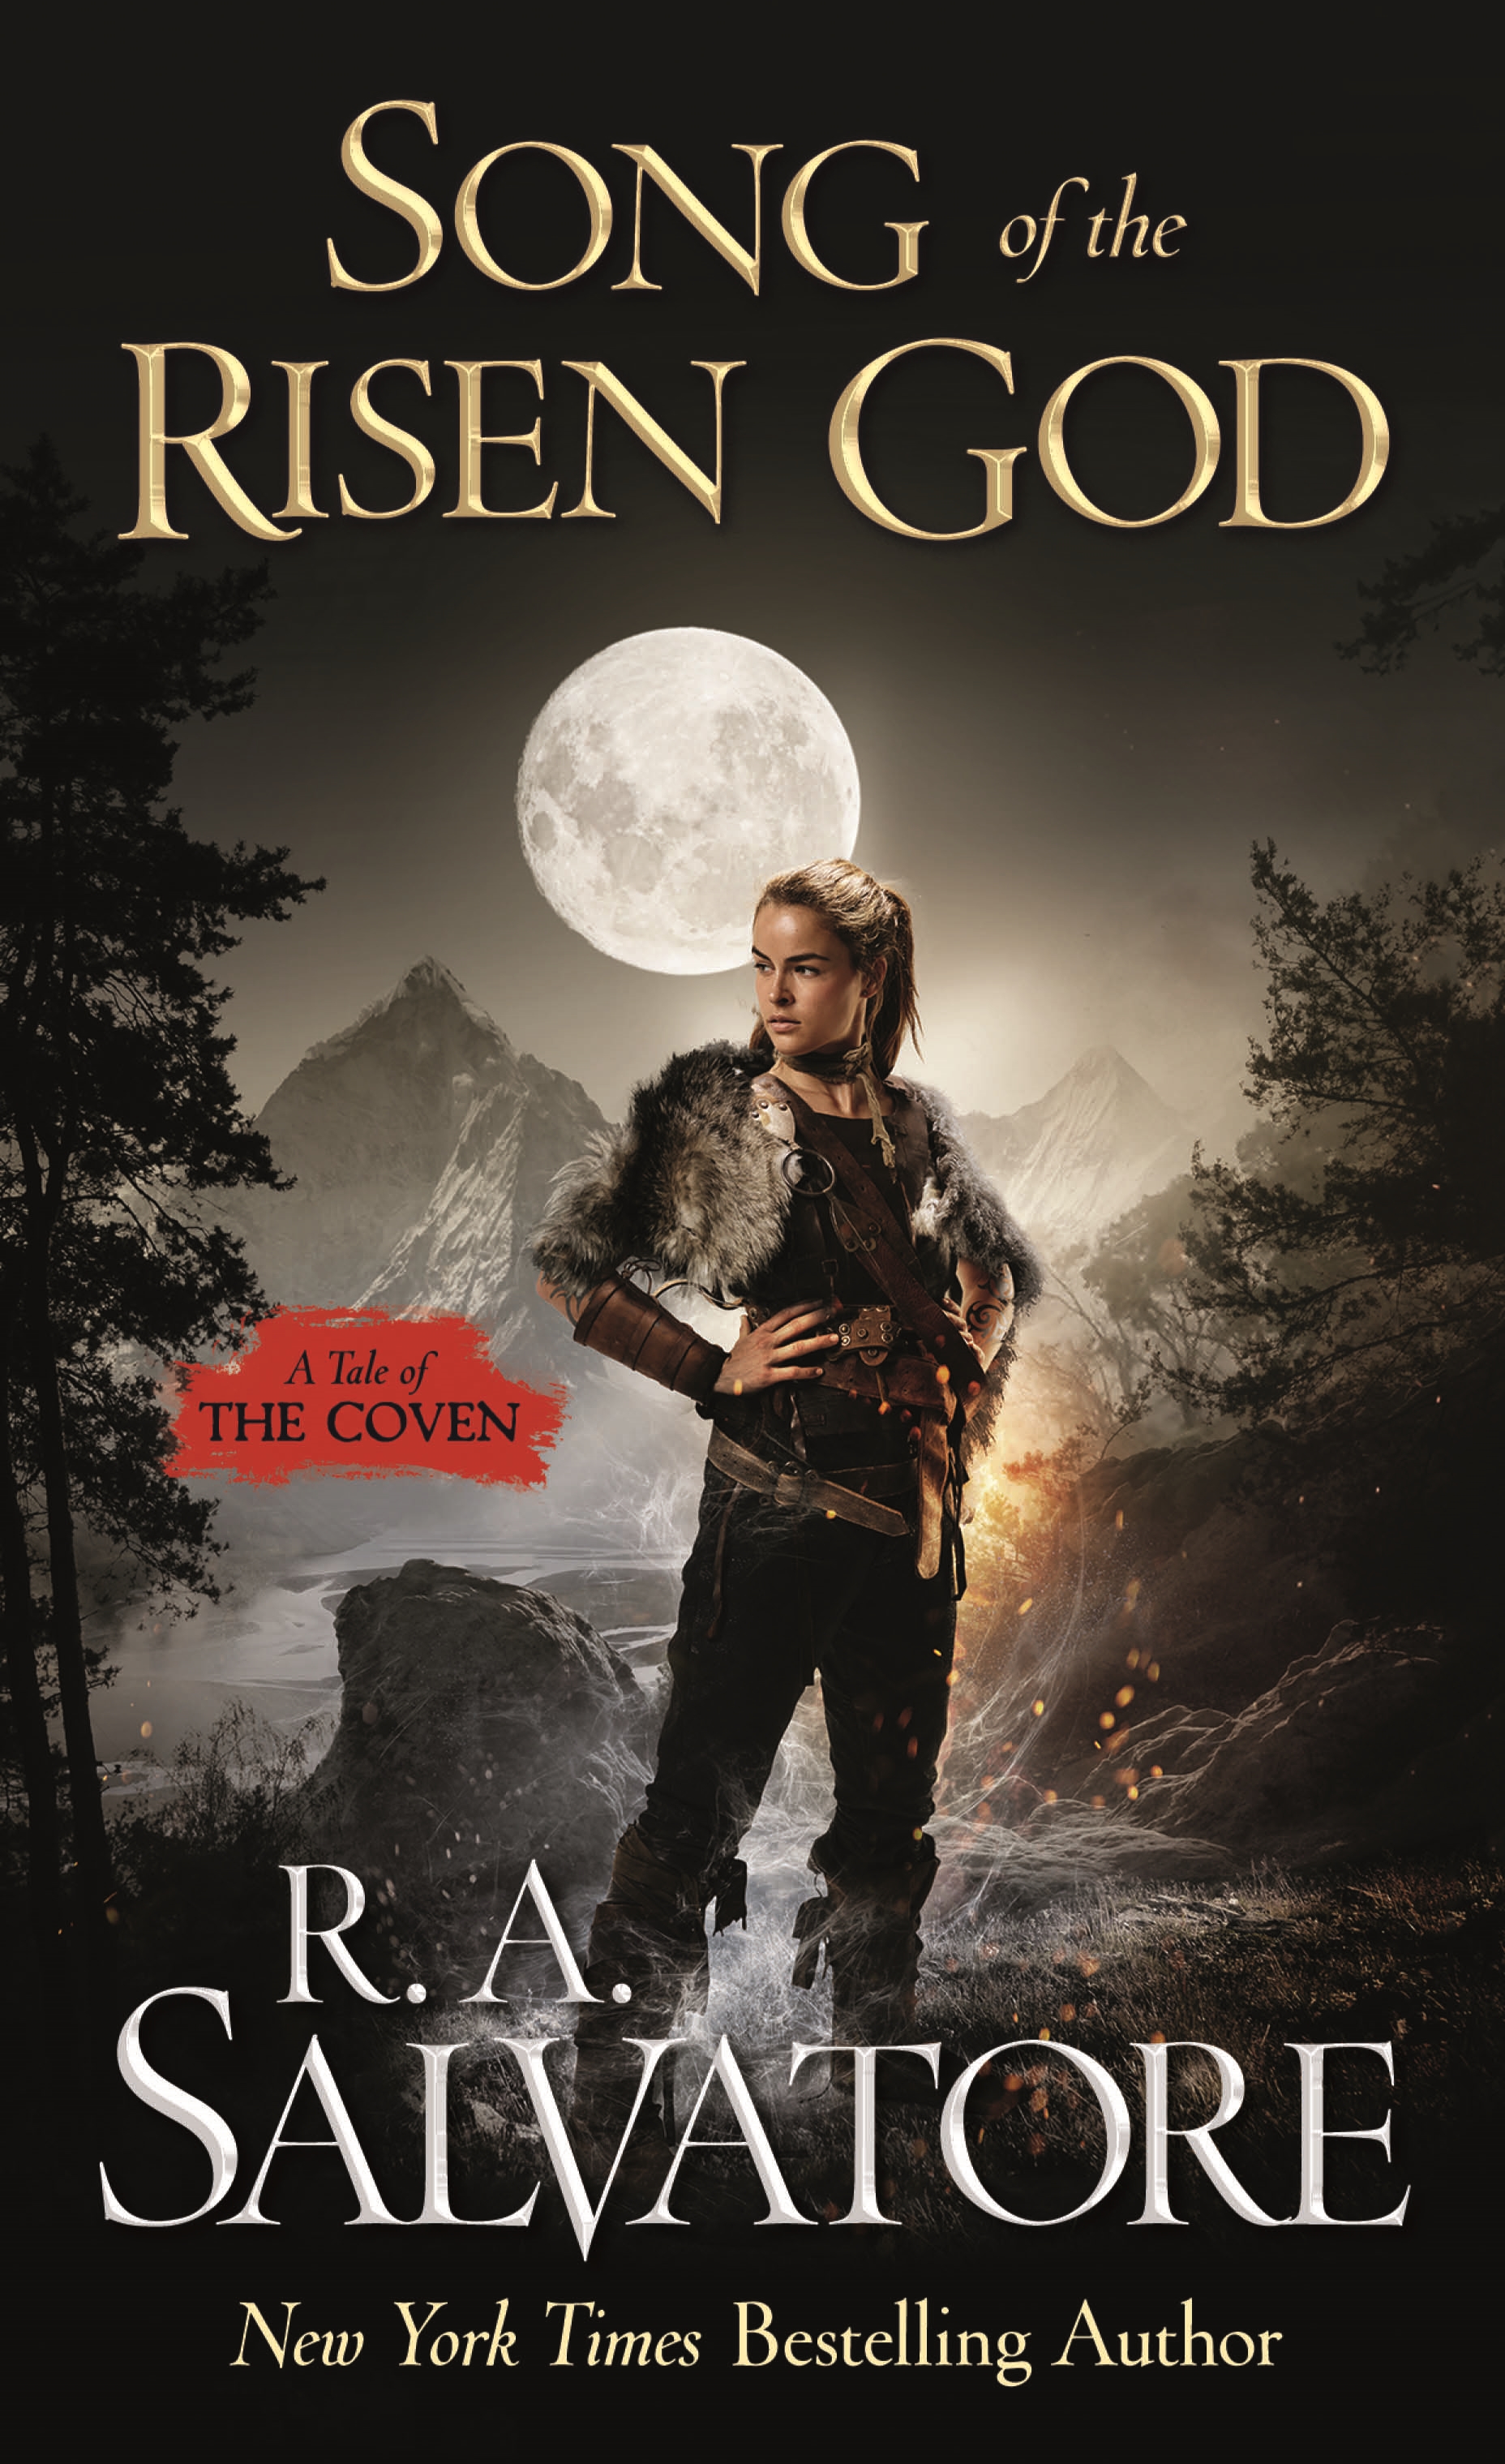 Song of the Risen God : A Tale of the Coven by R. A. Salvatore